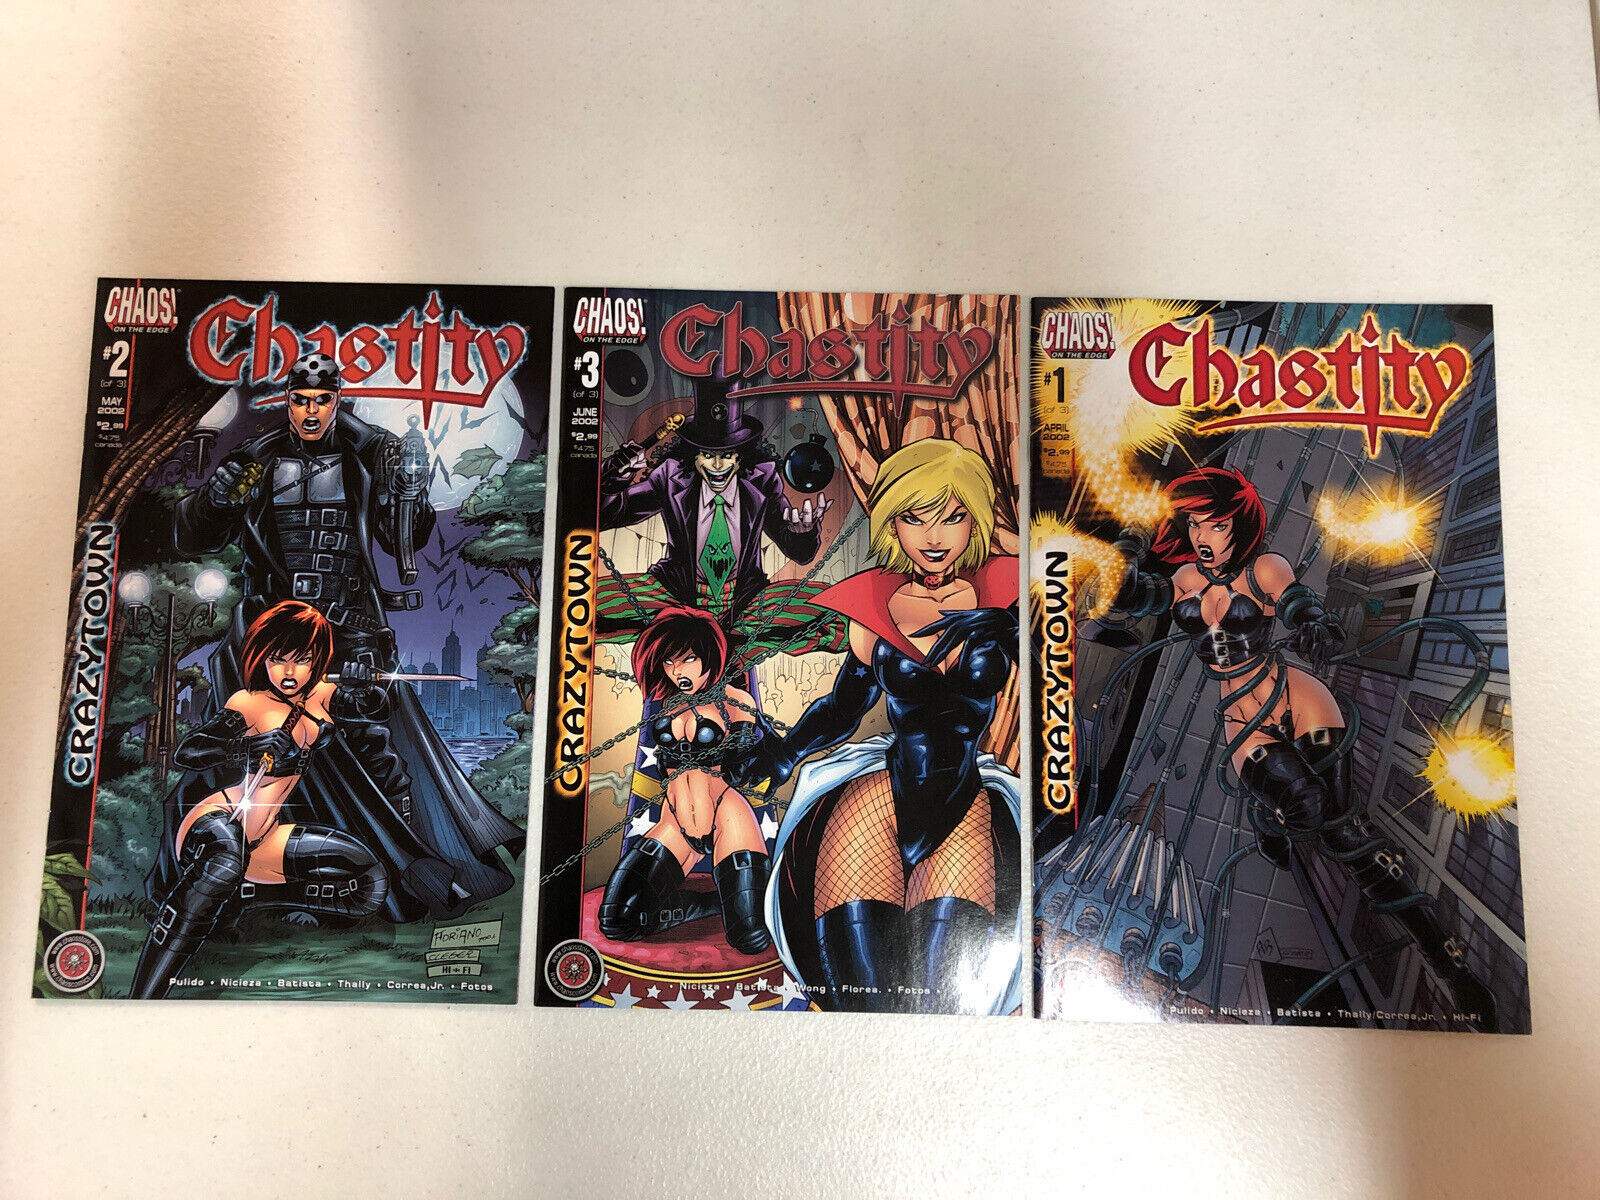 Chasity Crazytown (2002) #1 2 3 (VF/NM) Complete Set Adriano Bastista art Chaos